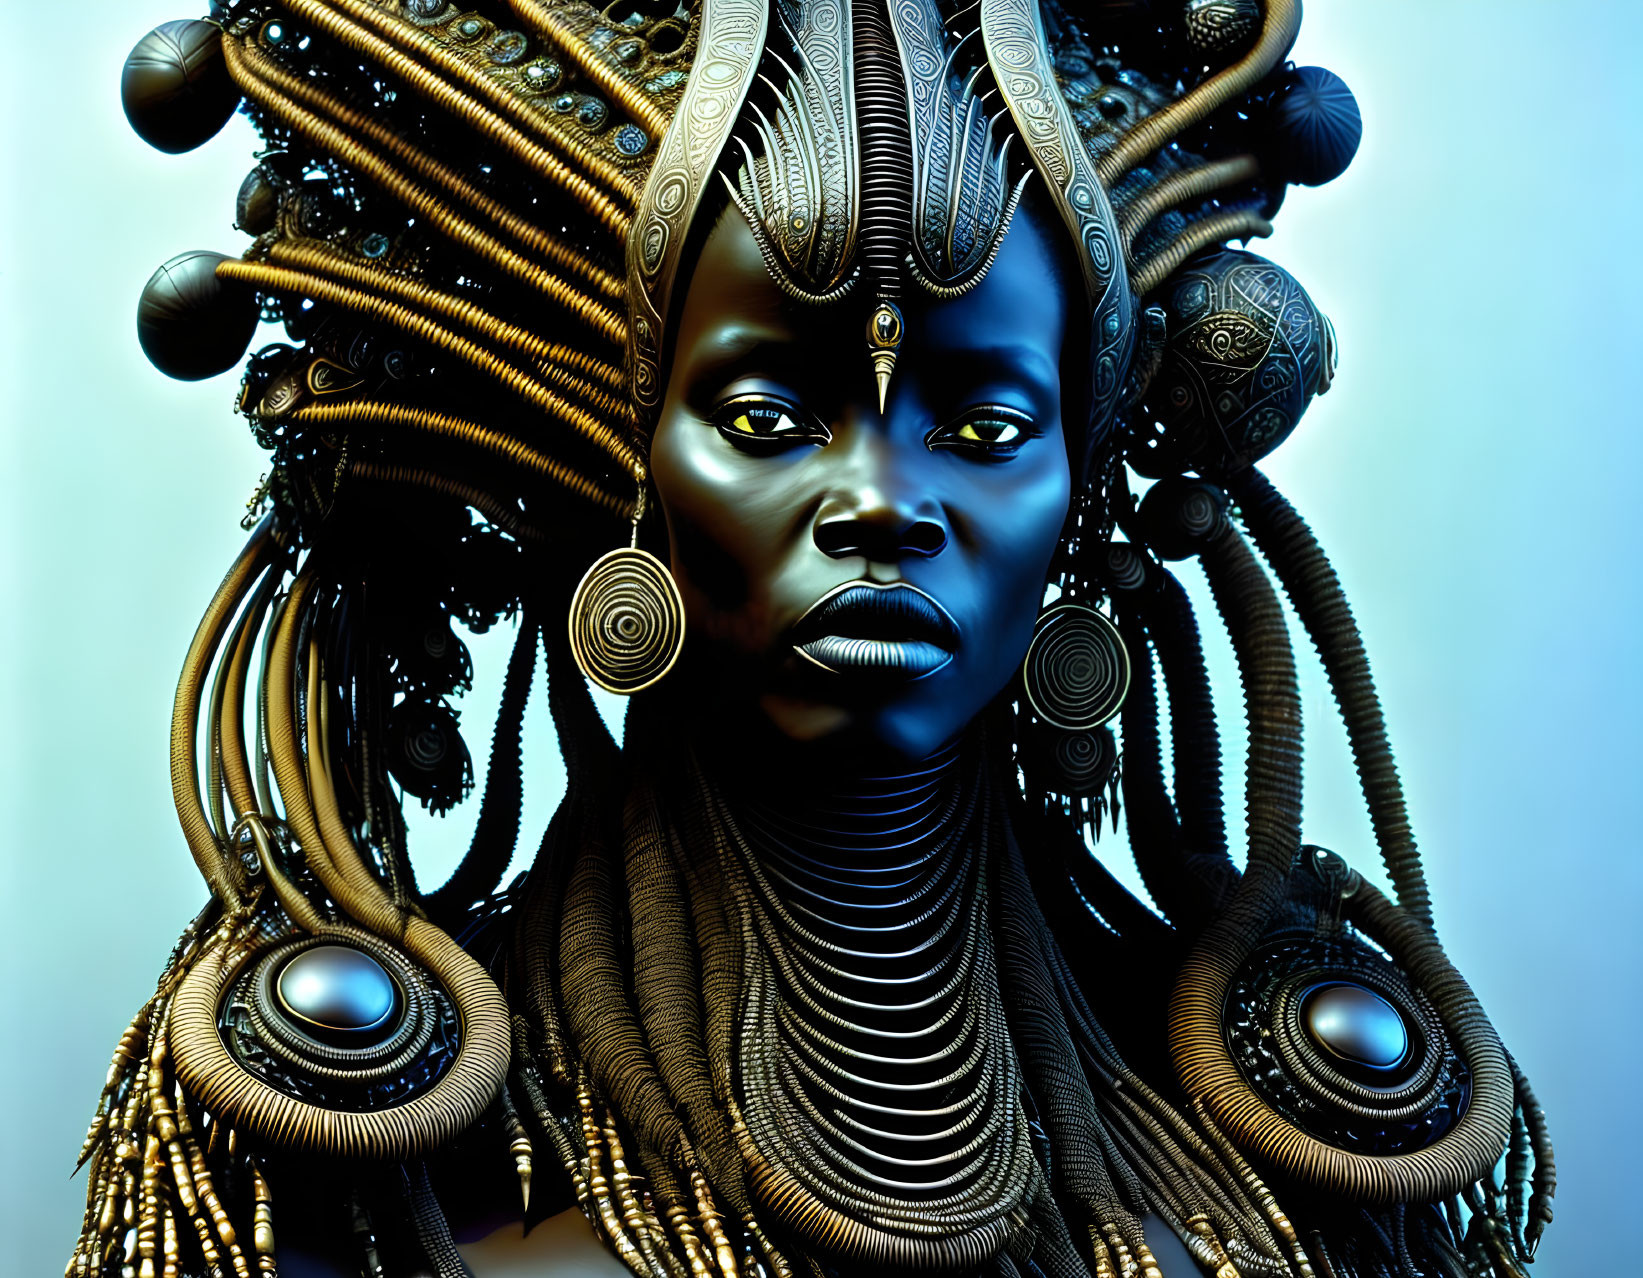 Detailed digital portrait with ornate hair ornaments and neck rings against a dark skin and blue background.